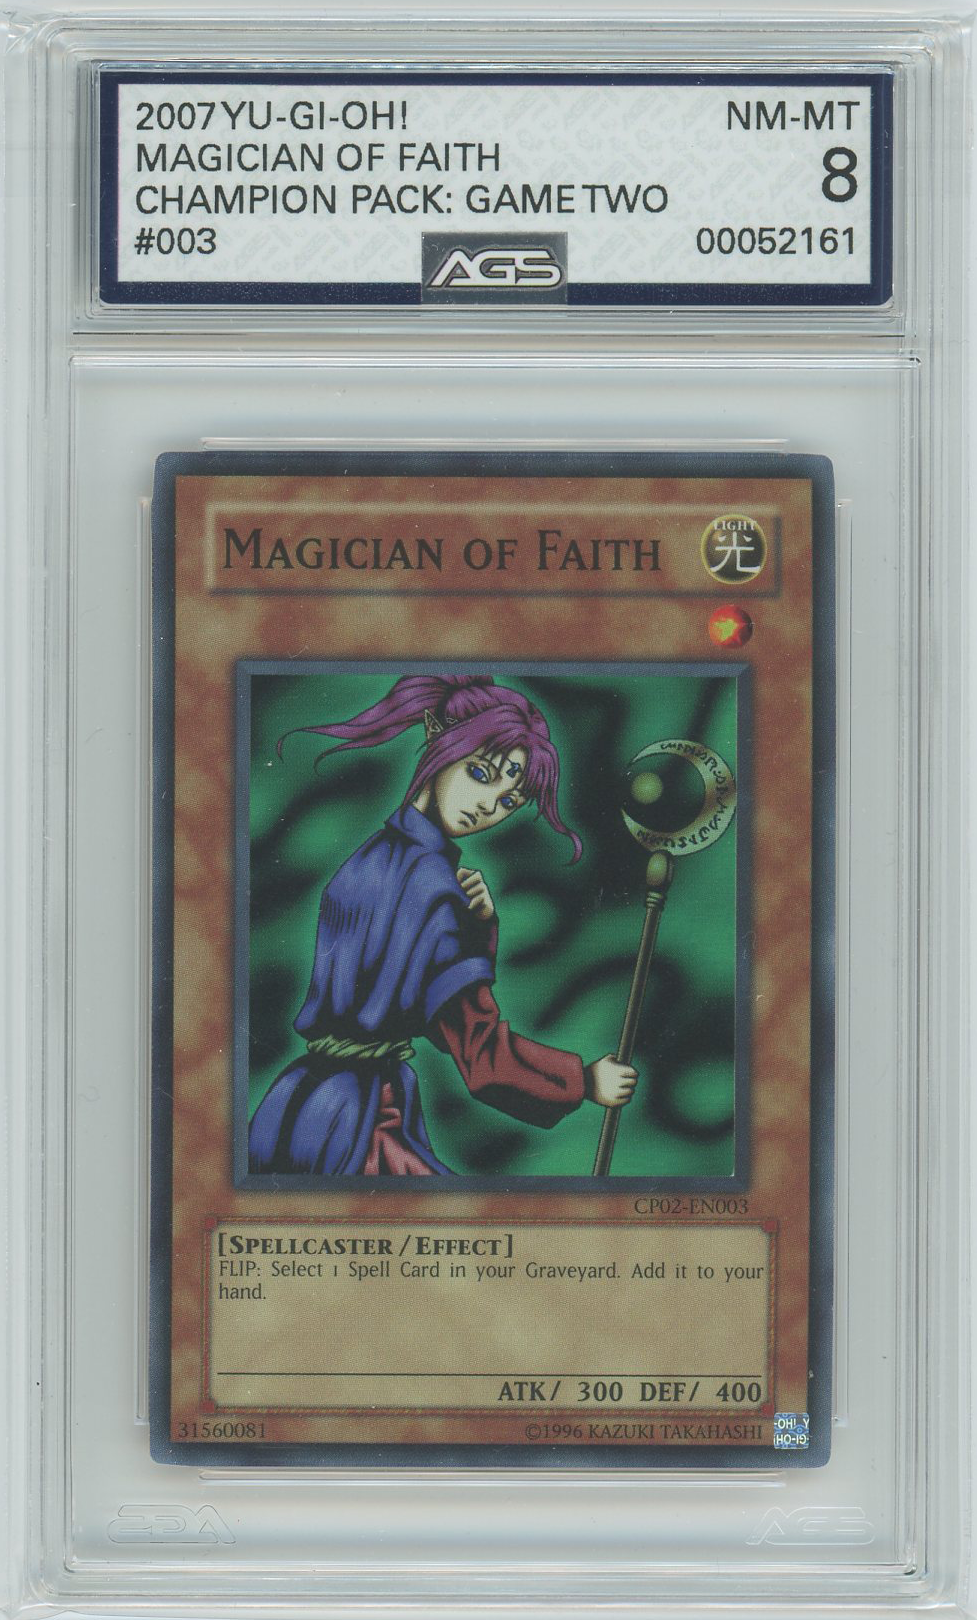 AGS (NM-MT 8) Magician of Faith CP02-EN003 - Champion Pack Game Two (#00052161)